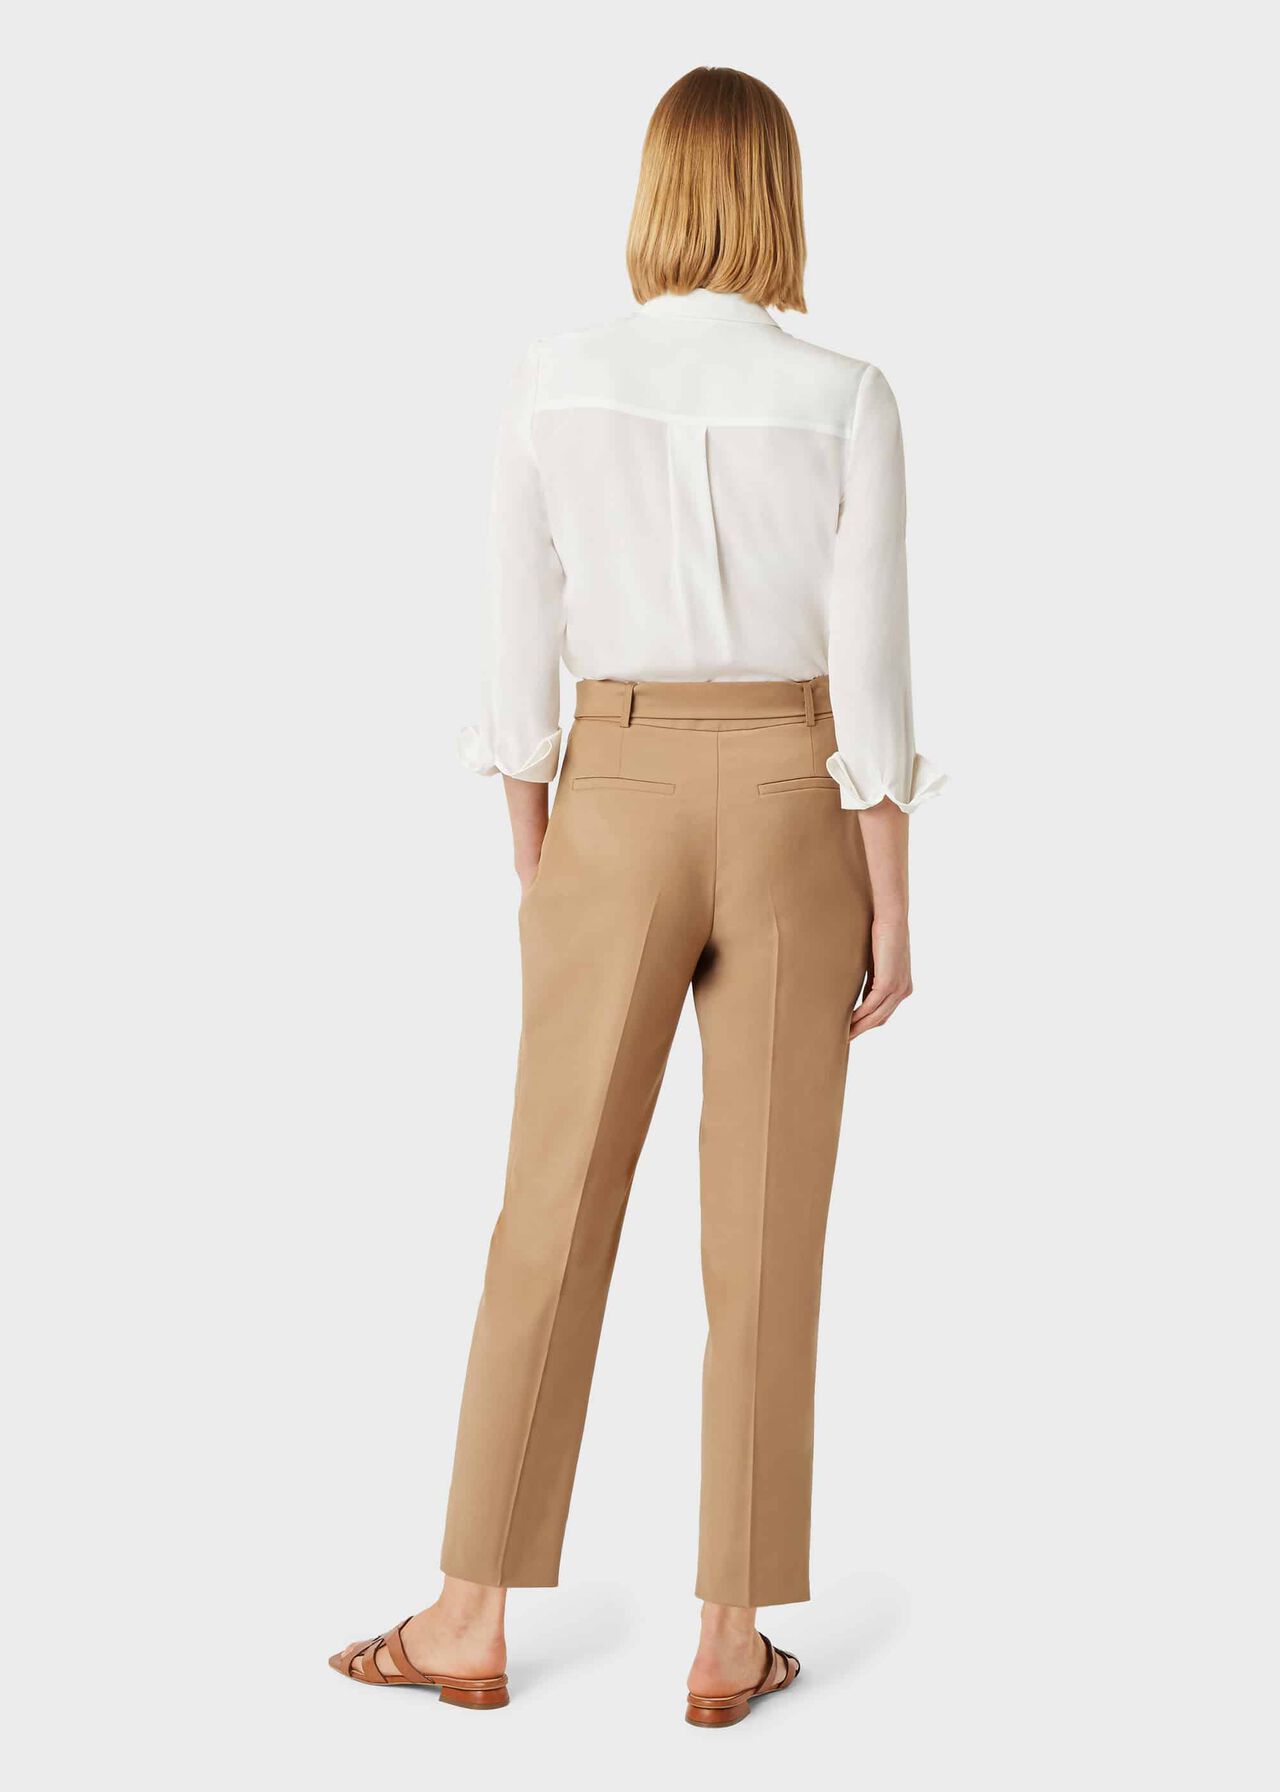 Harrietta Tapered trousers With Wool, Dark Camel, hi-res